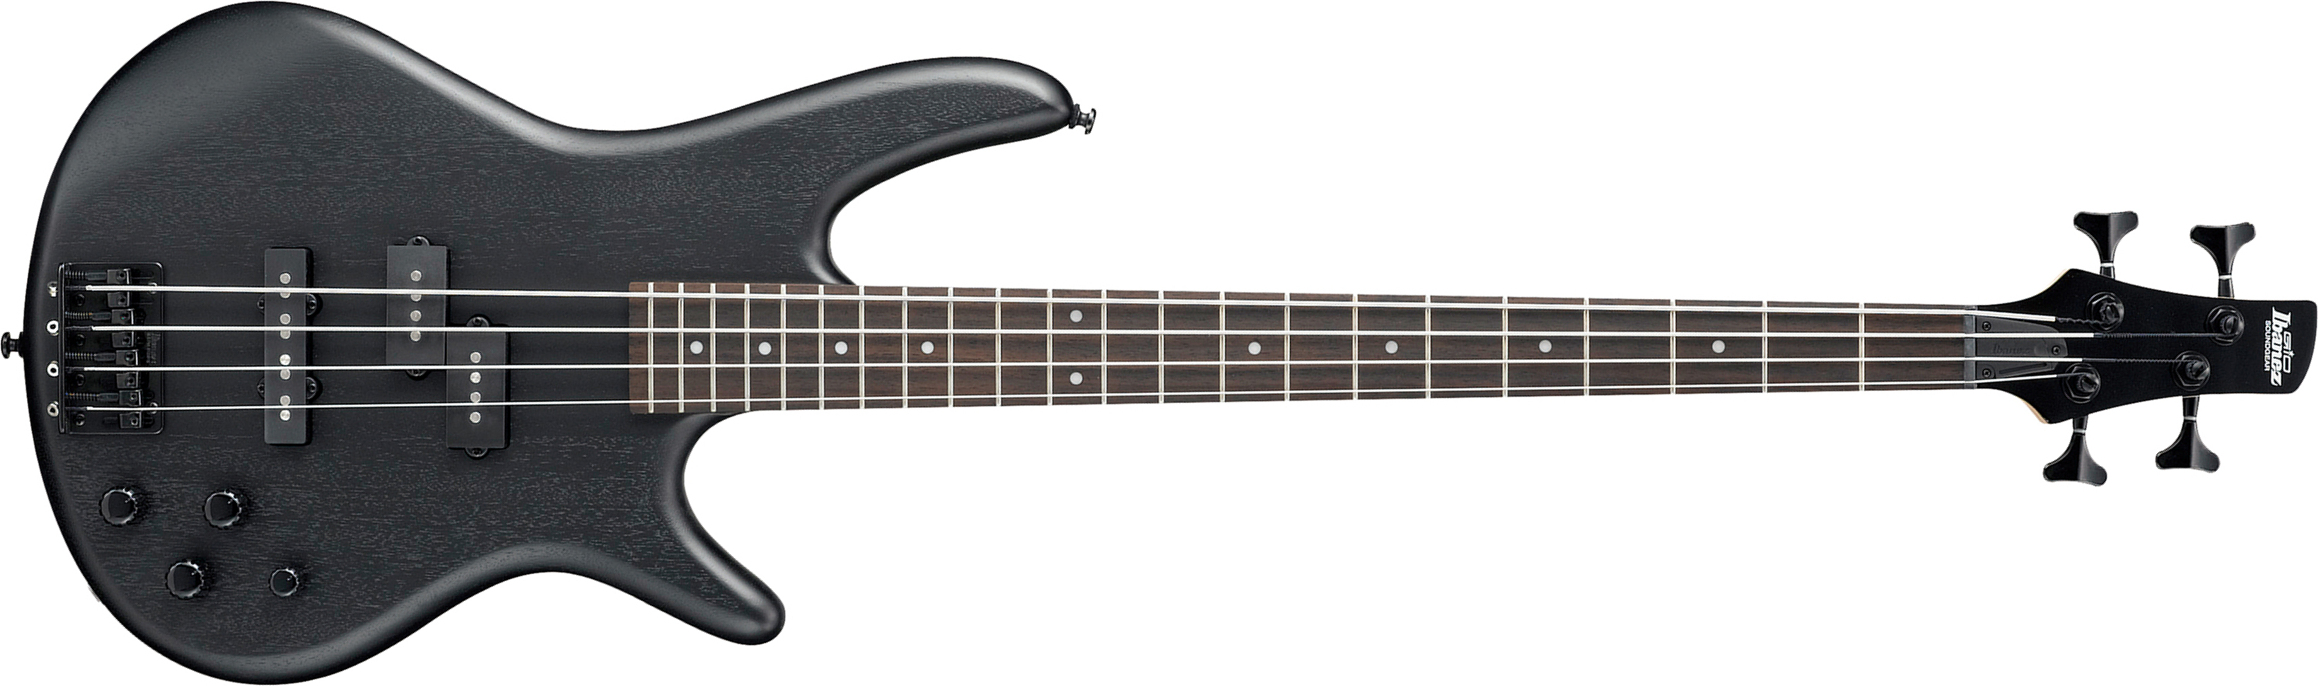 Ibanez Gsr200b Wk Gio Active Jat - Weathered Black - Solidbody E-bass - Main picture